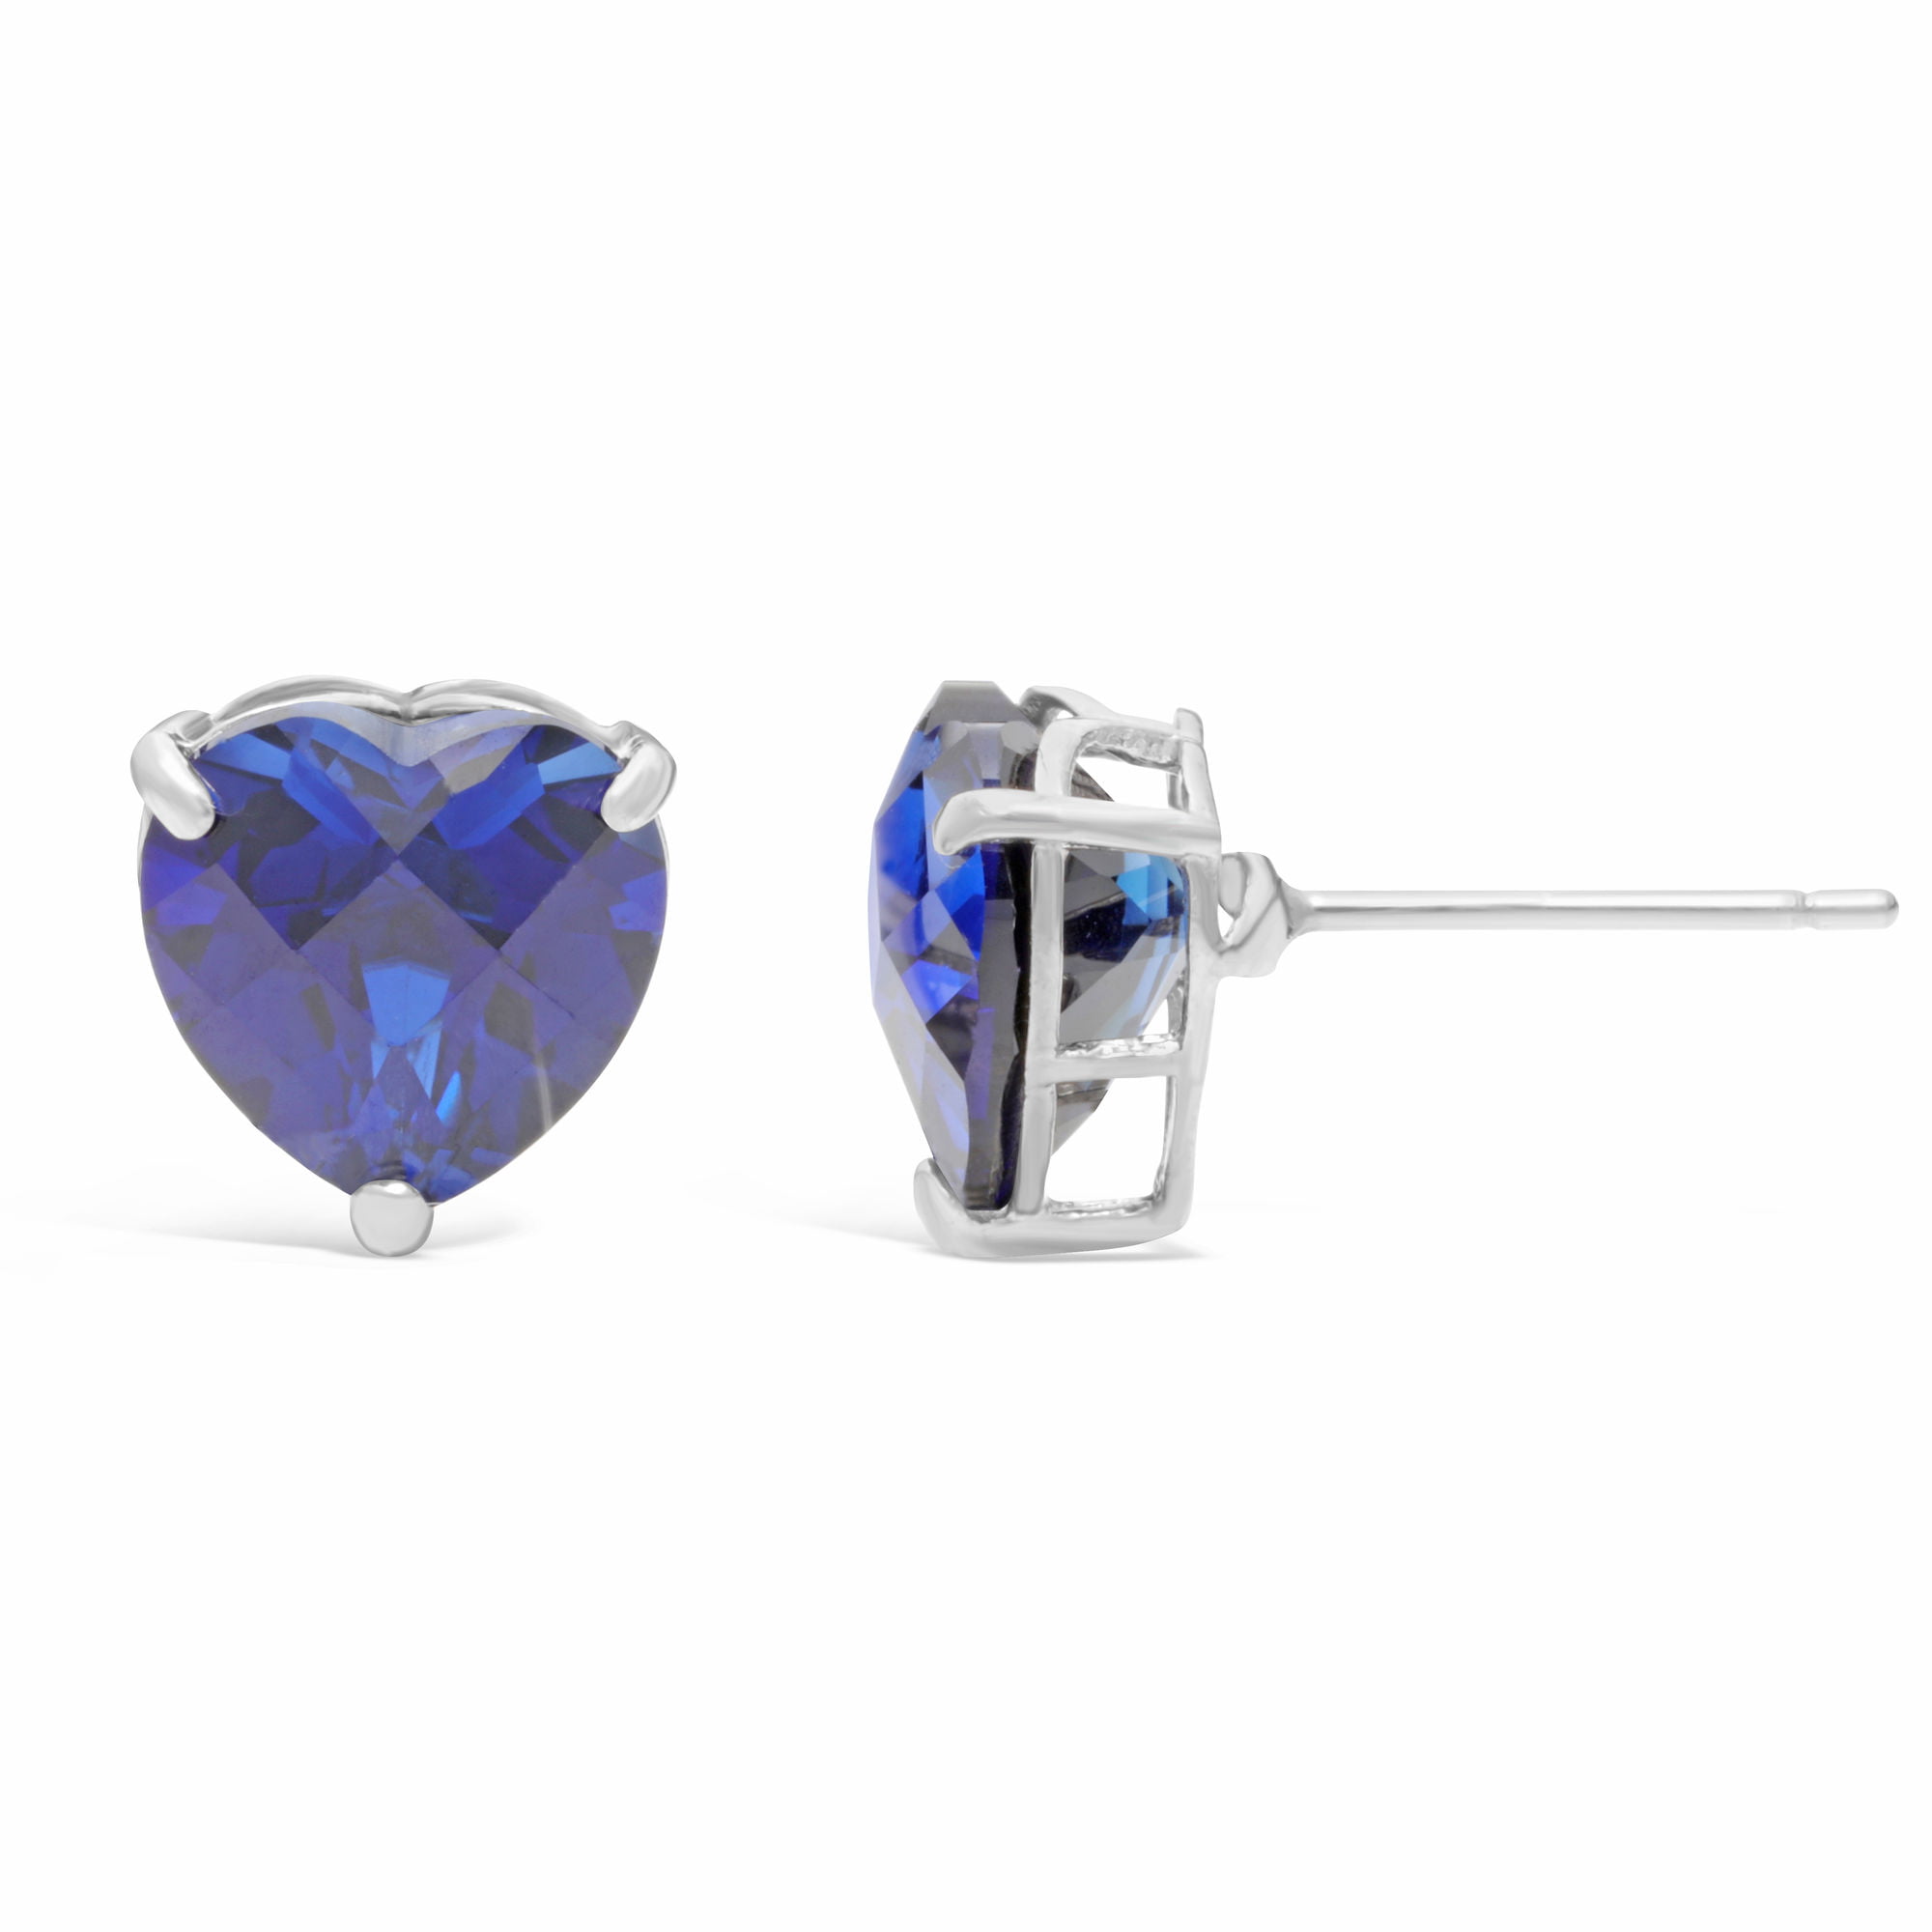 3.60 Carat Heart Shaped Blue Sapphire Stud Earrings in 14k White Gold 8mm Friction Back by Lavari Jewelers